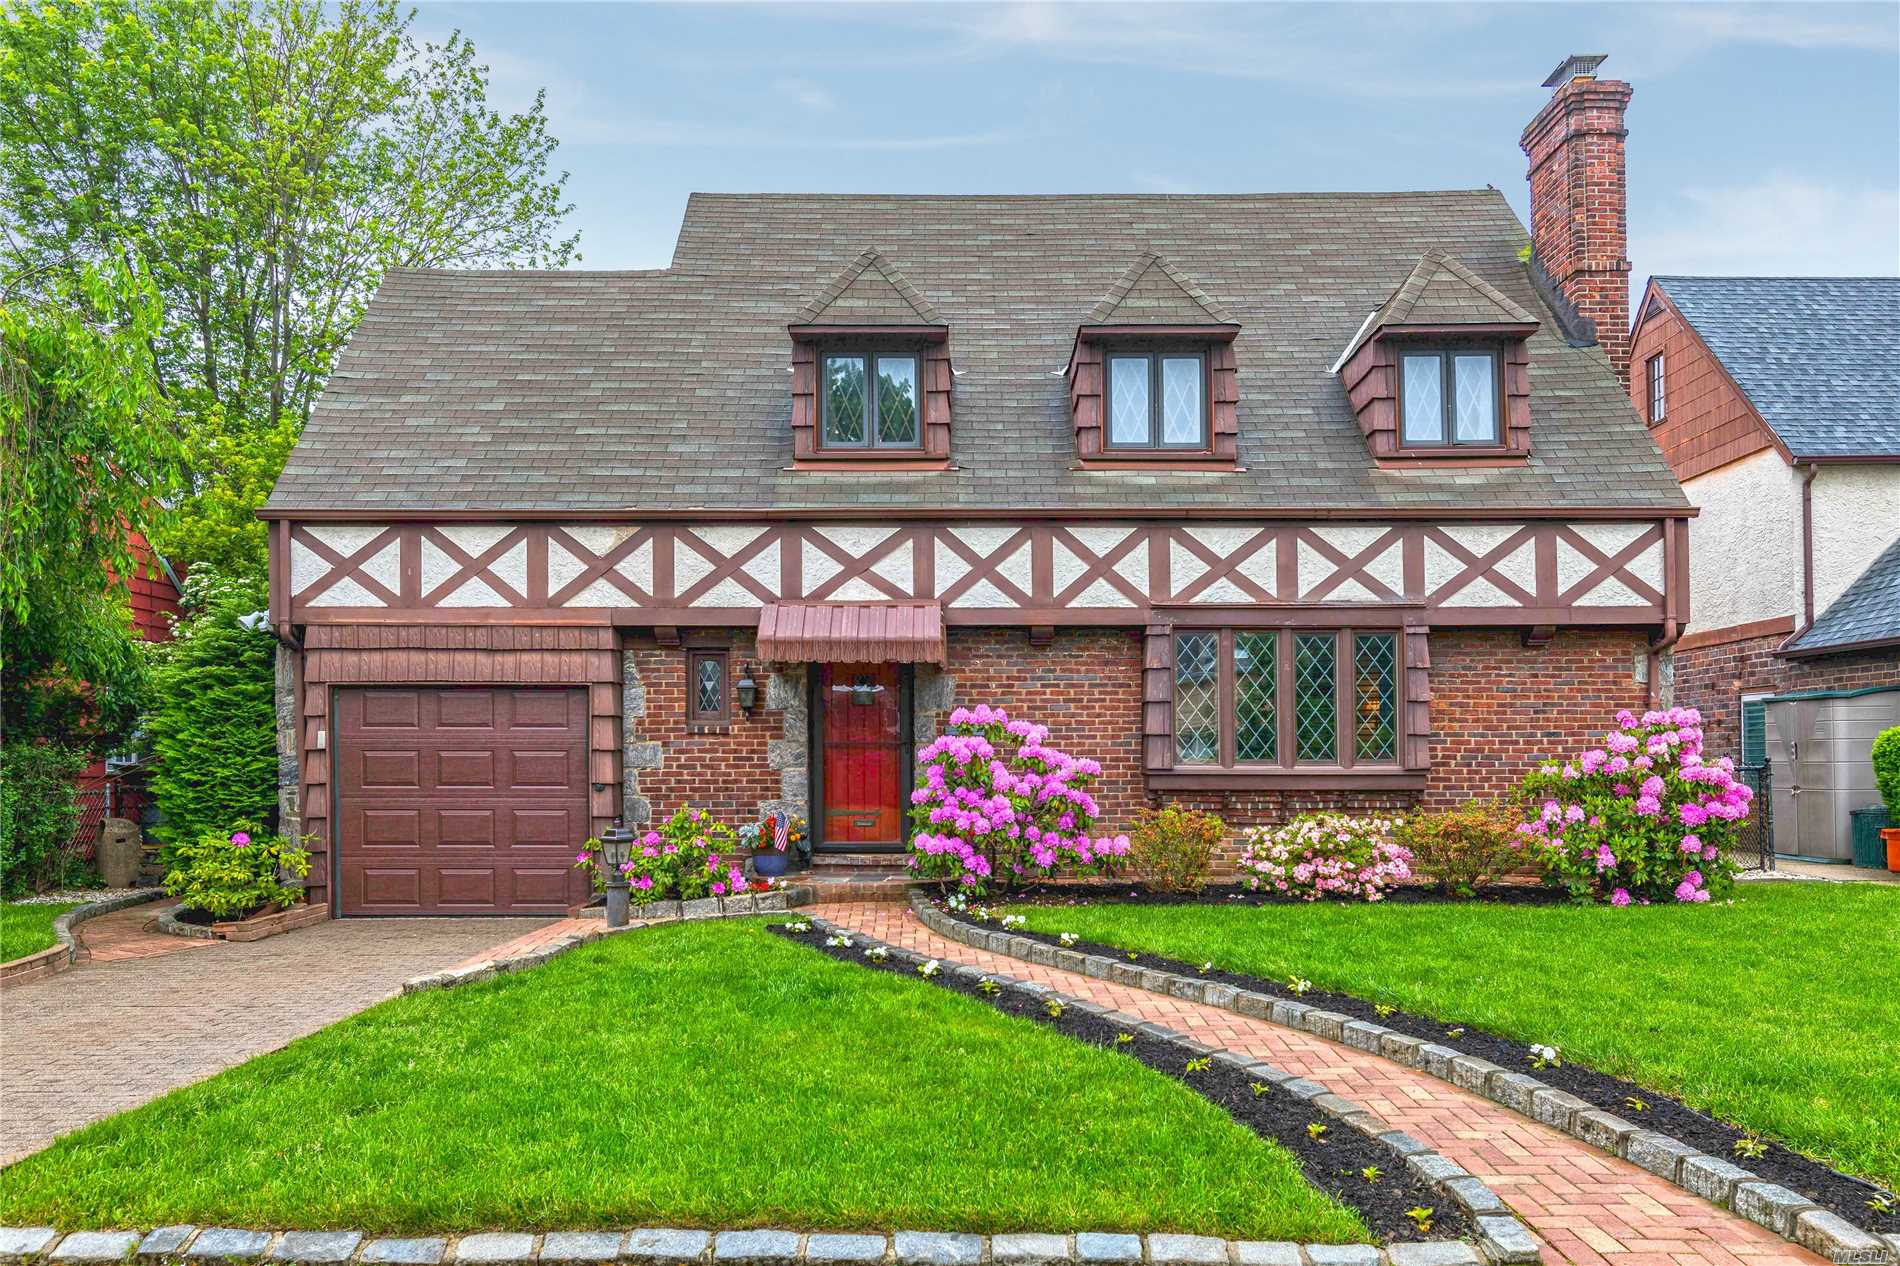 This Pristine Tudor Home Is Located In The Mott Section Of Mineola. Featuring Beautiful Outdoor Space And A Big Backyard All On A Quiet Mid-Block, The Property Is Close To Major Roads, Shopping And Train. Many Recent Renovations Include A Newly Designed Master Bedroom Suite With Walk-In Closet. Natural Gas Heat, Central Air, Renovated Bathrooms And A Terrific Layout Comprised Of An Eat-In-Kitchen, Formal Dining Room And Living Room With Fireplace Plus A Finished Basement And More. Do Not Miss!